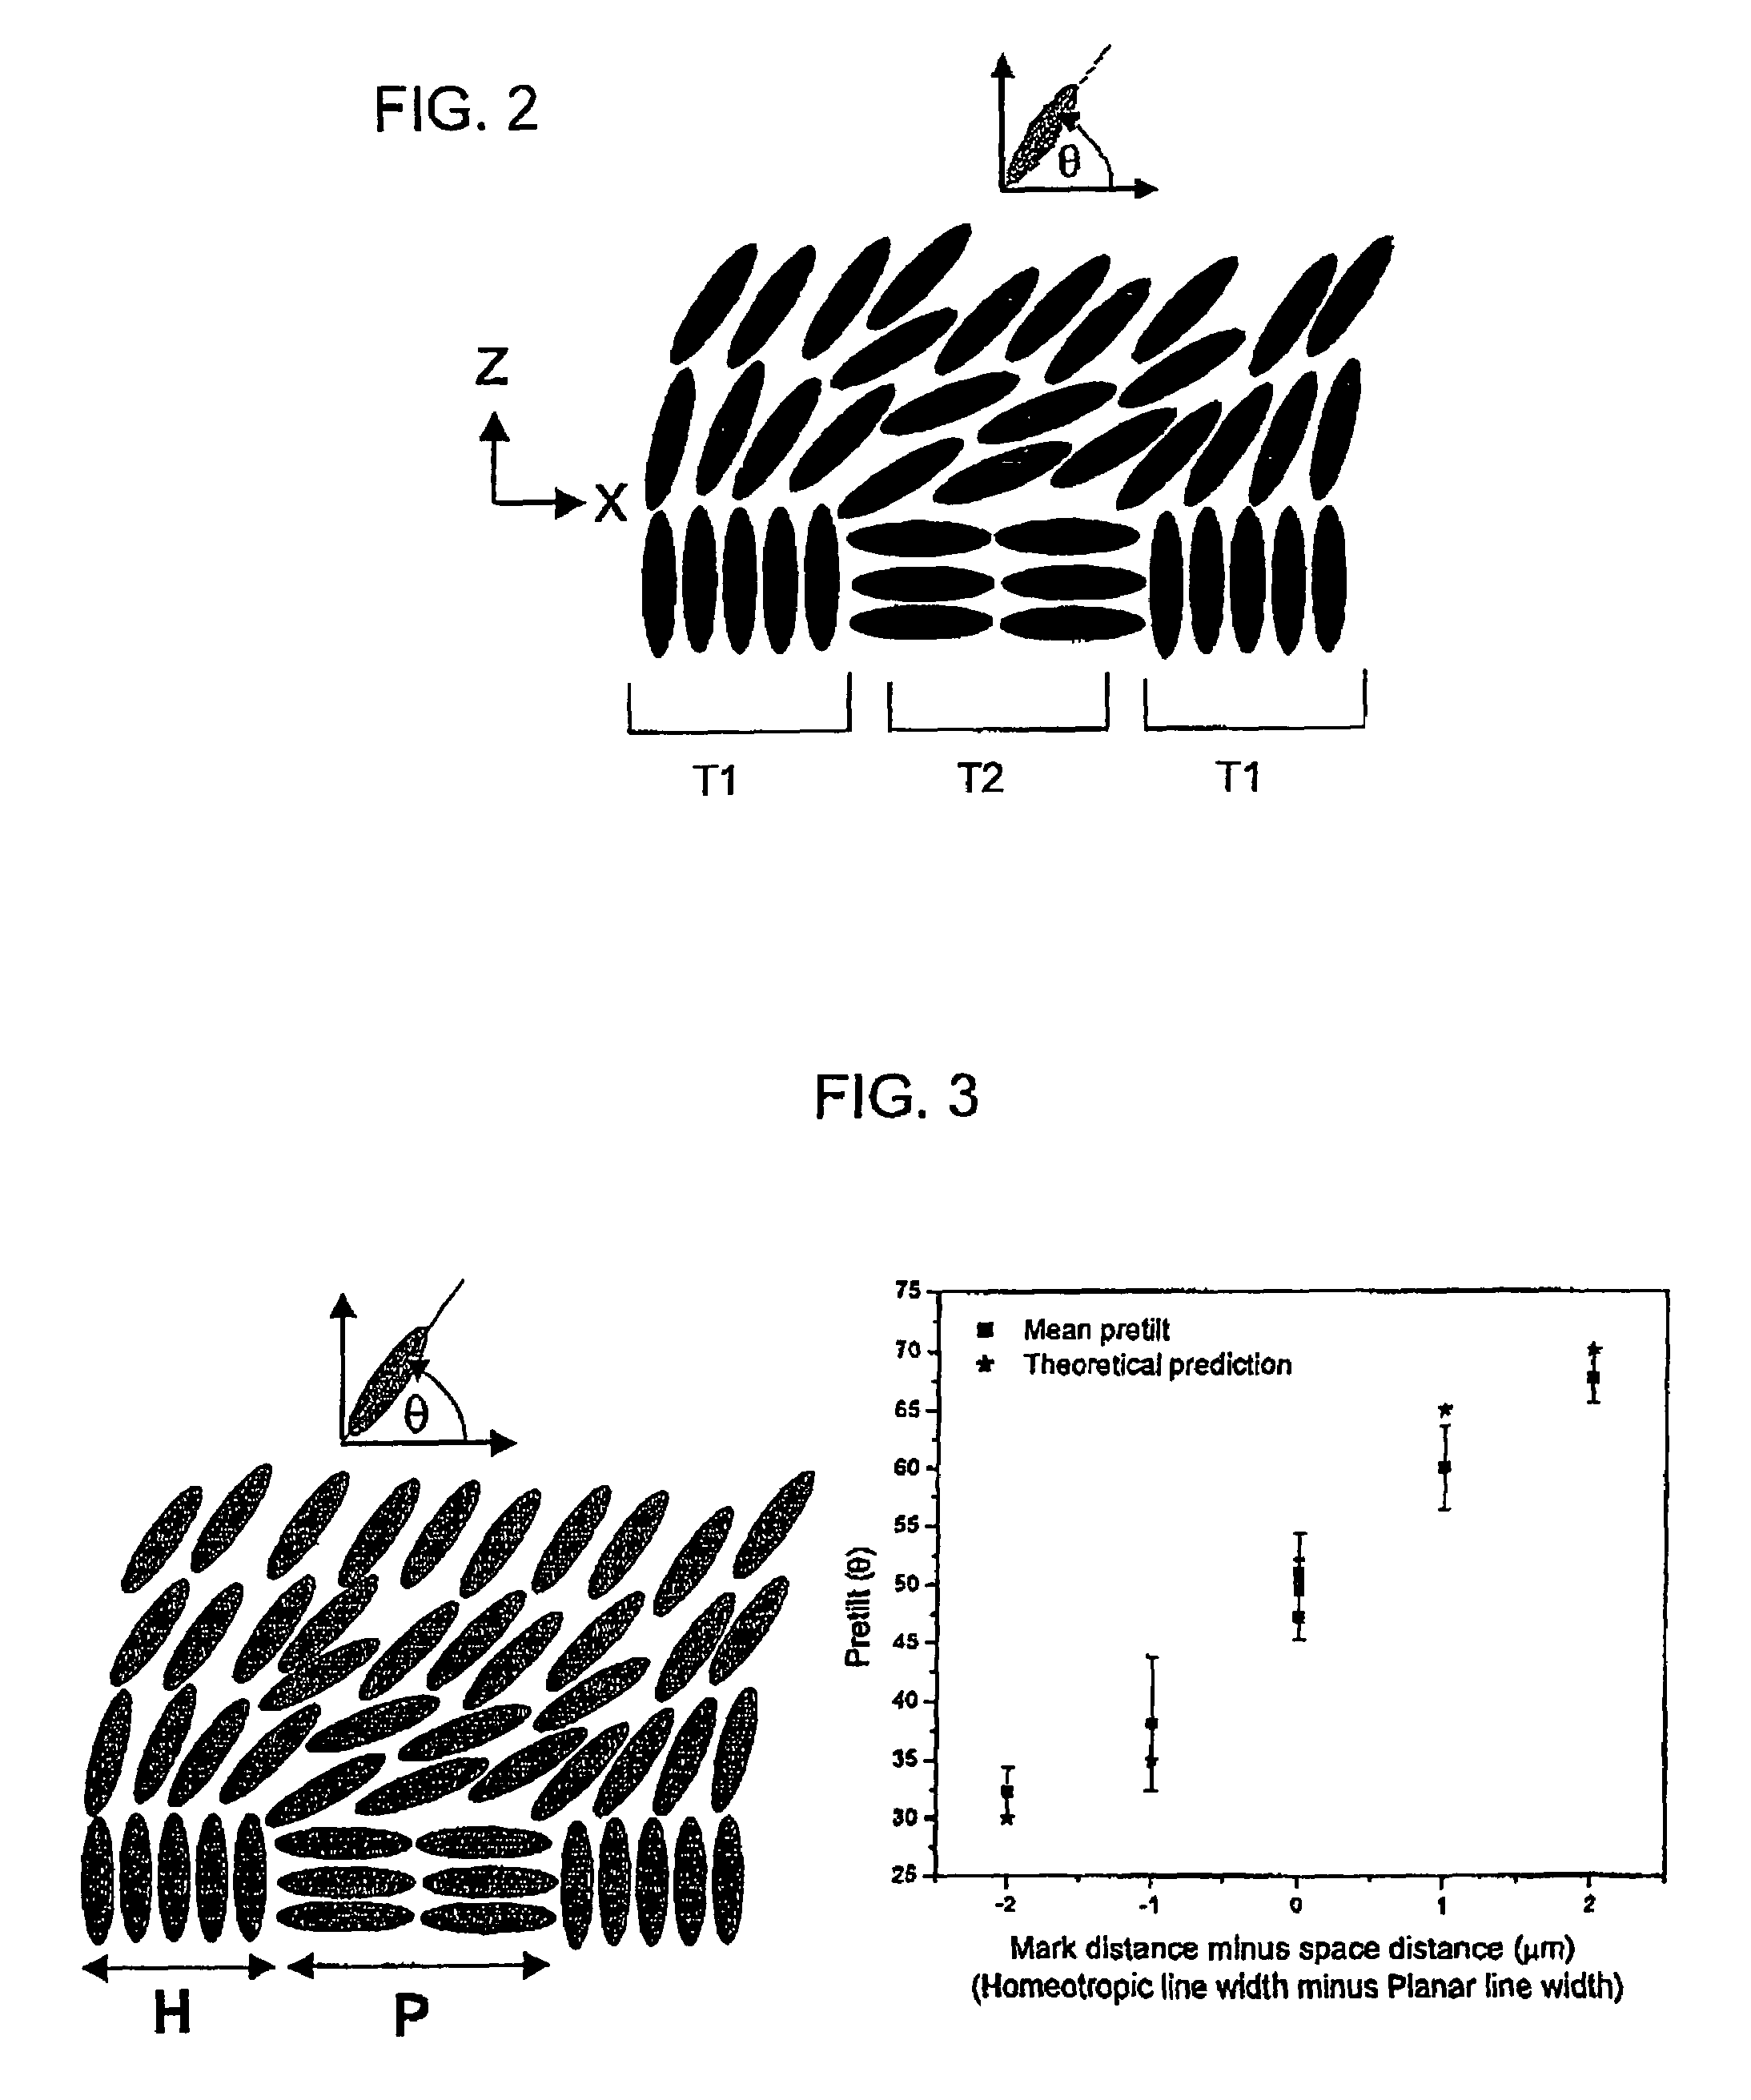 Control of liquid crystal alignment in an optical device